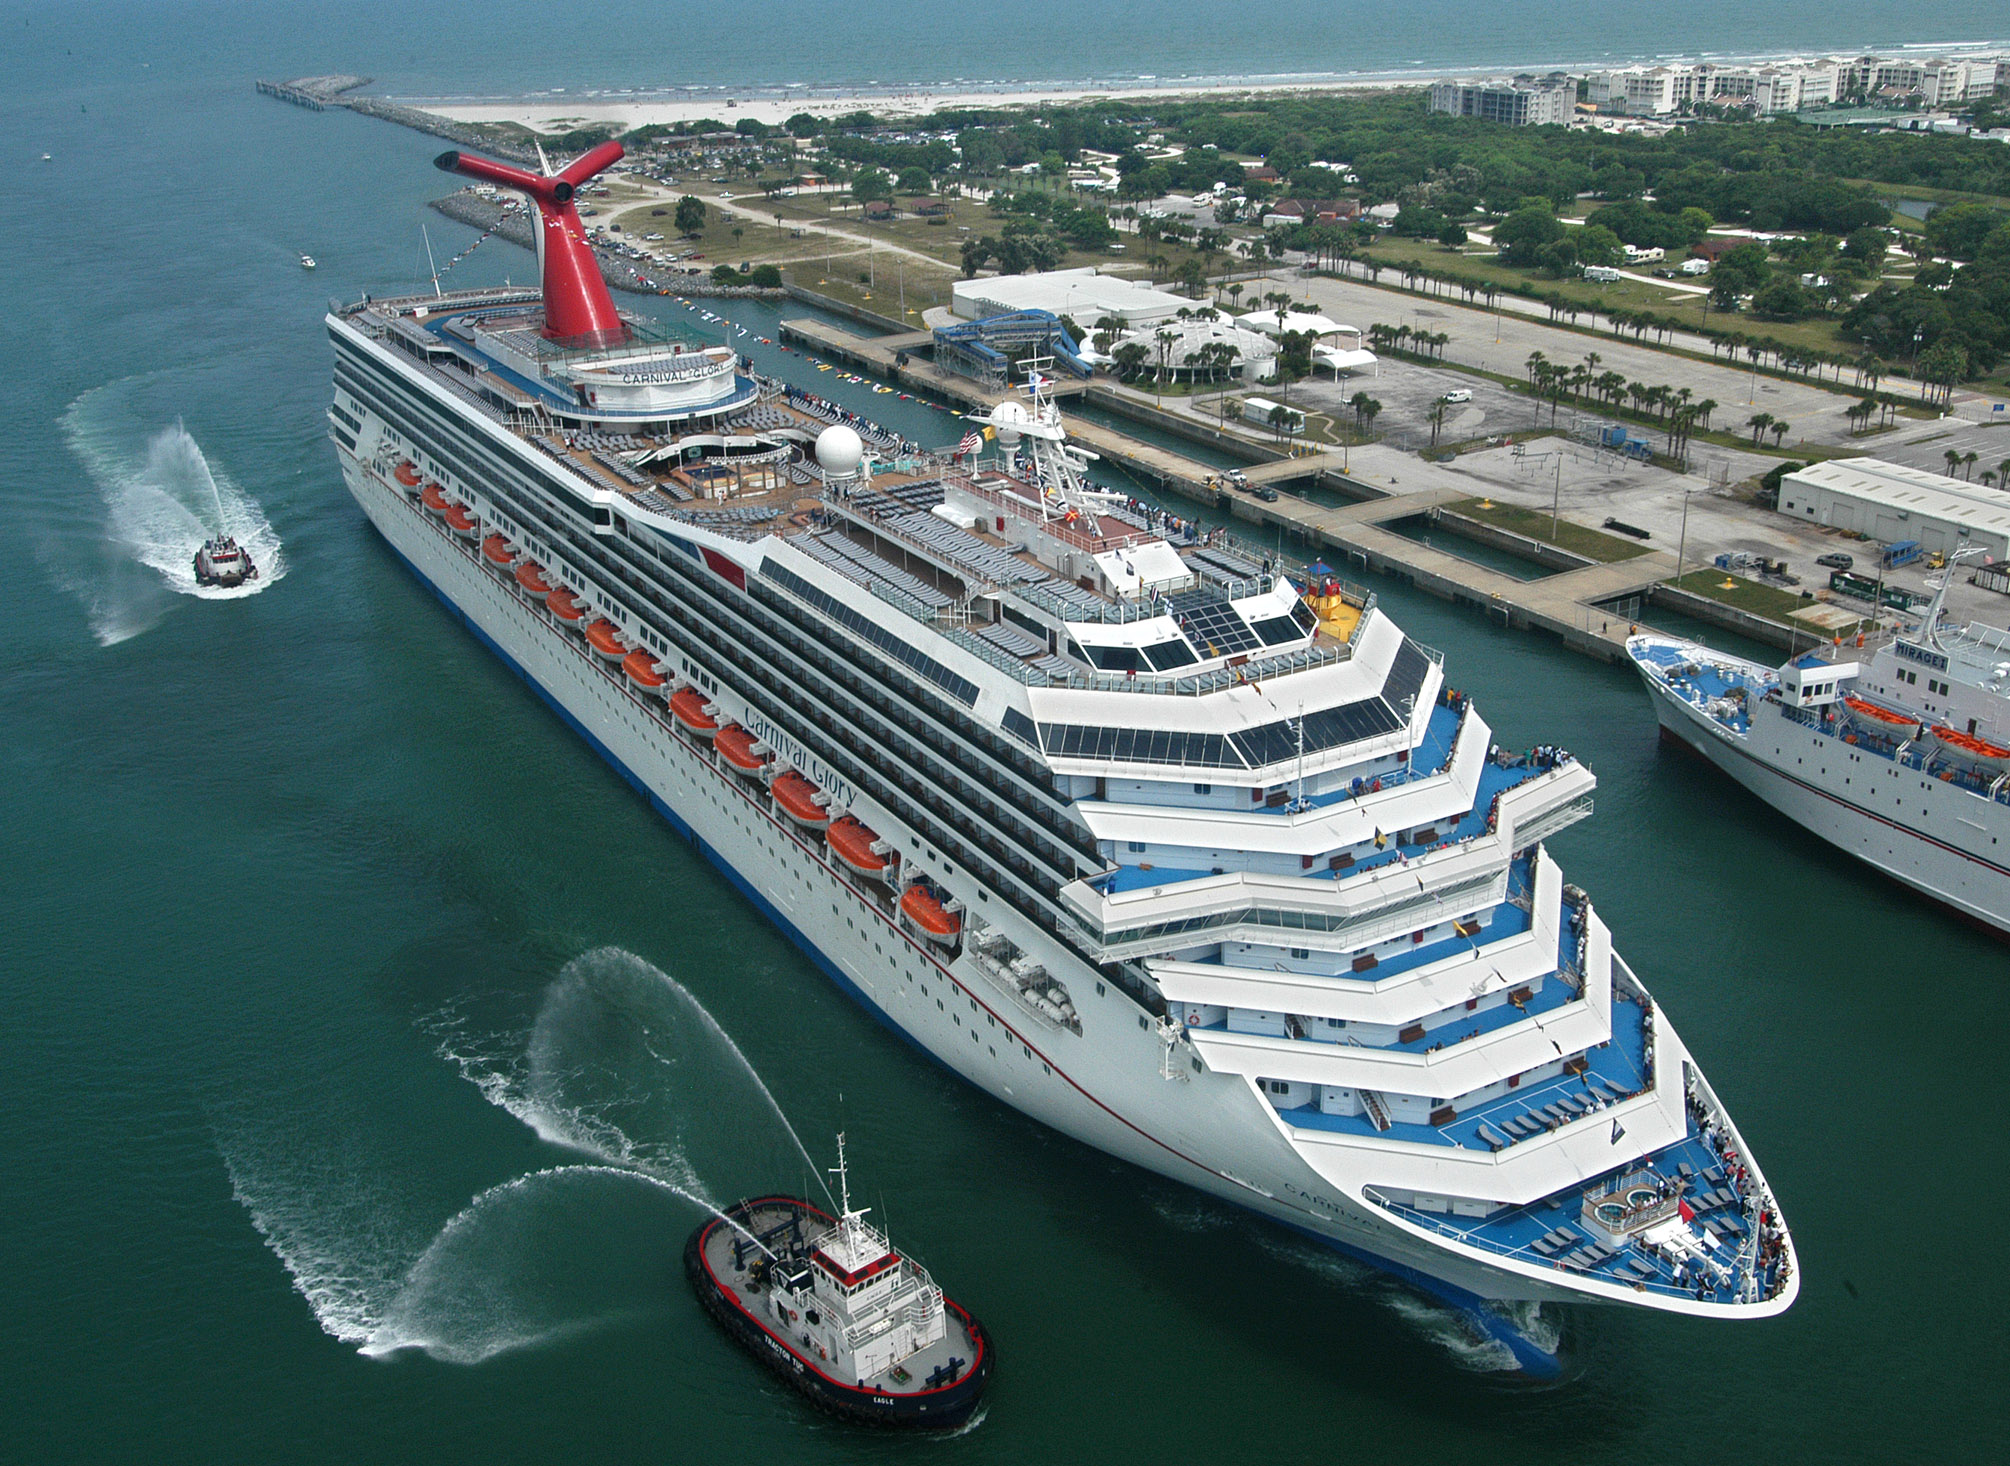 Carnival Cruise Ships Generate 10 Times More Pollution Than All of